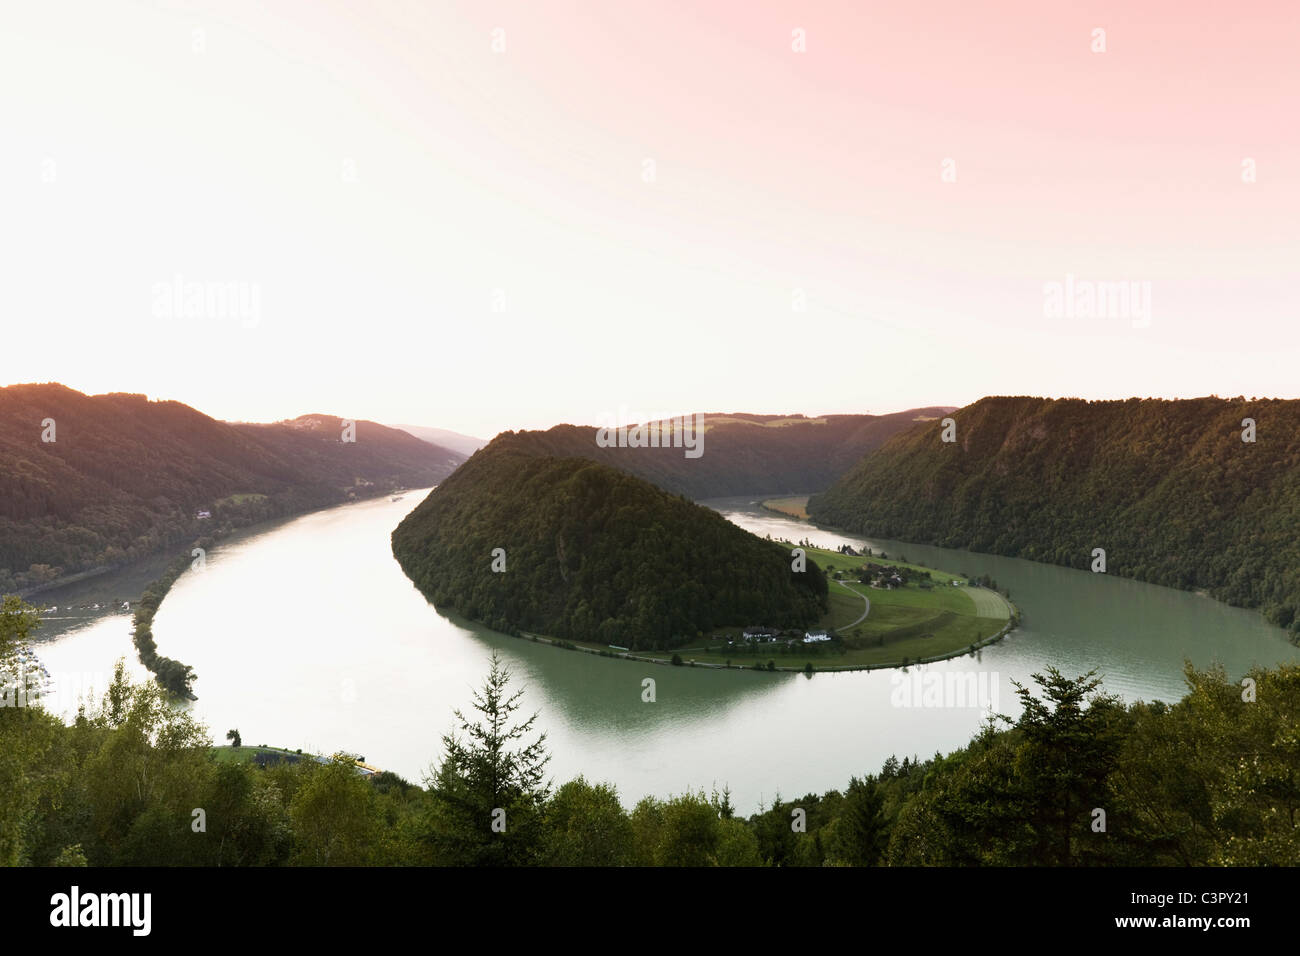 Austria, View of mountain ranges with danube river at dusk Stock Photo